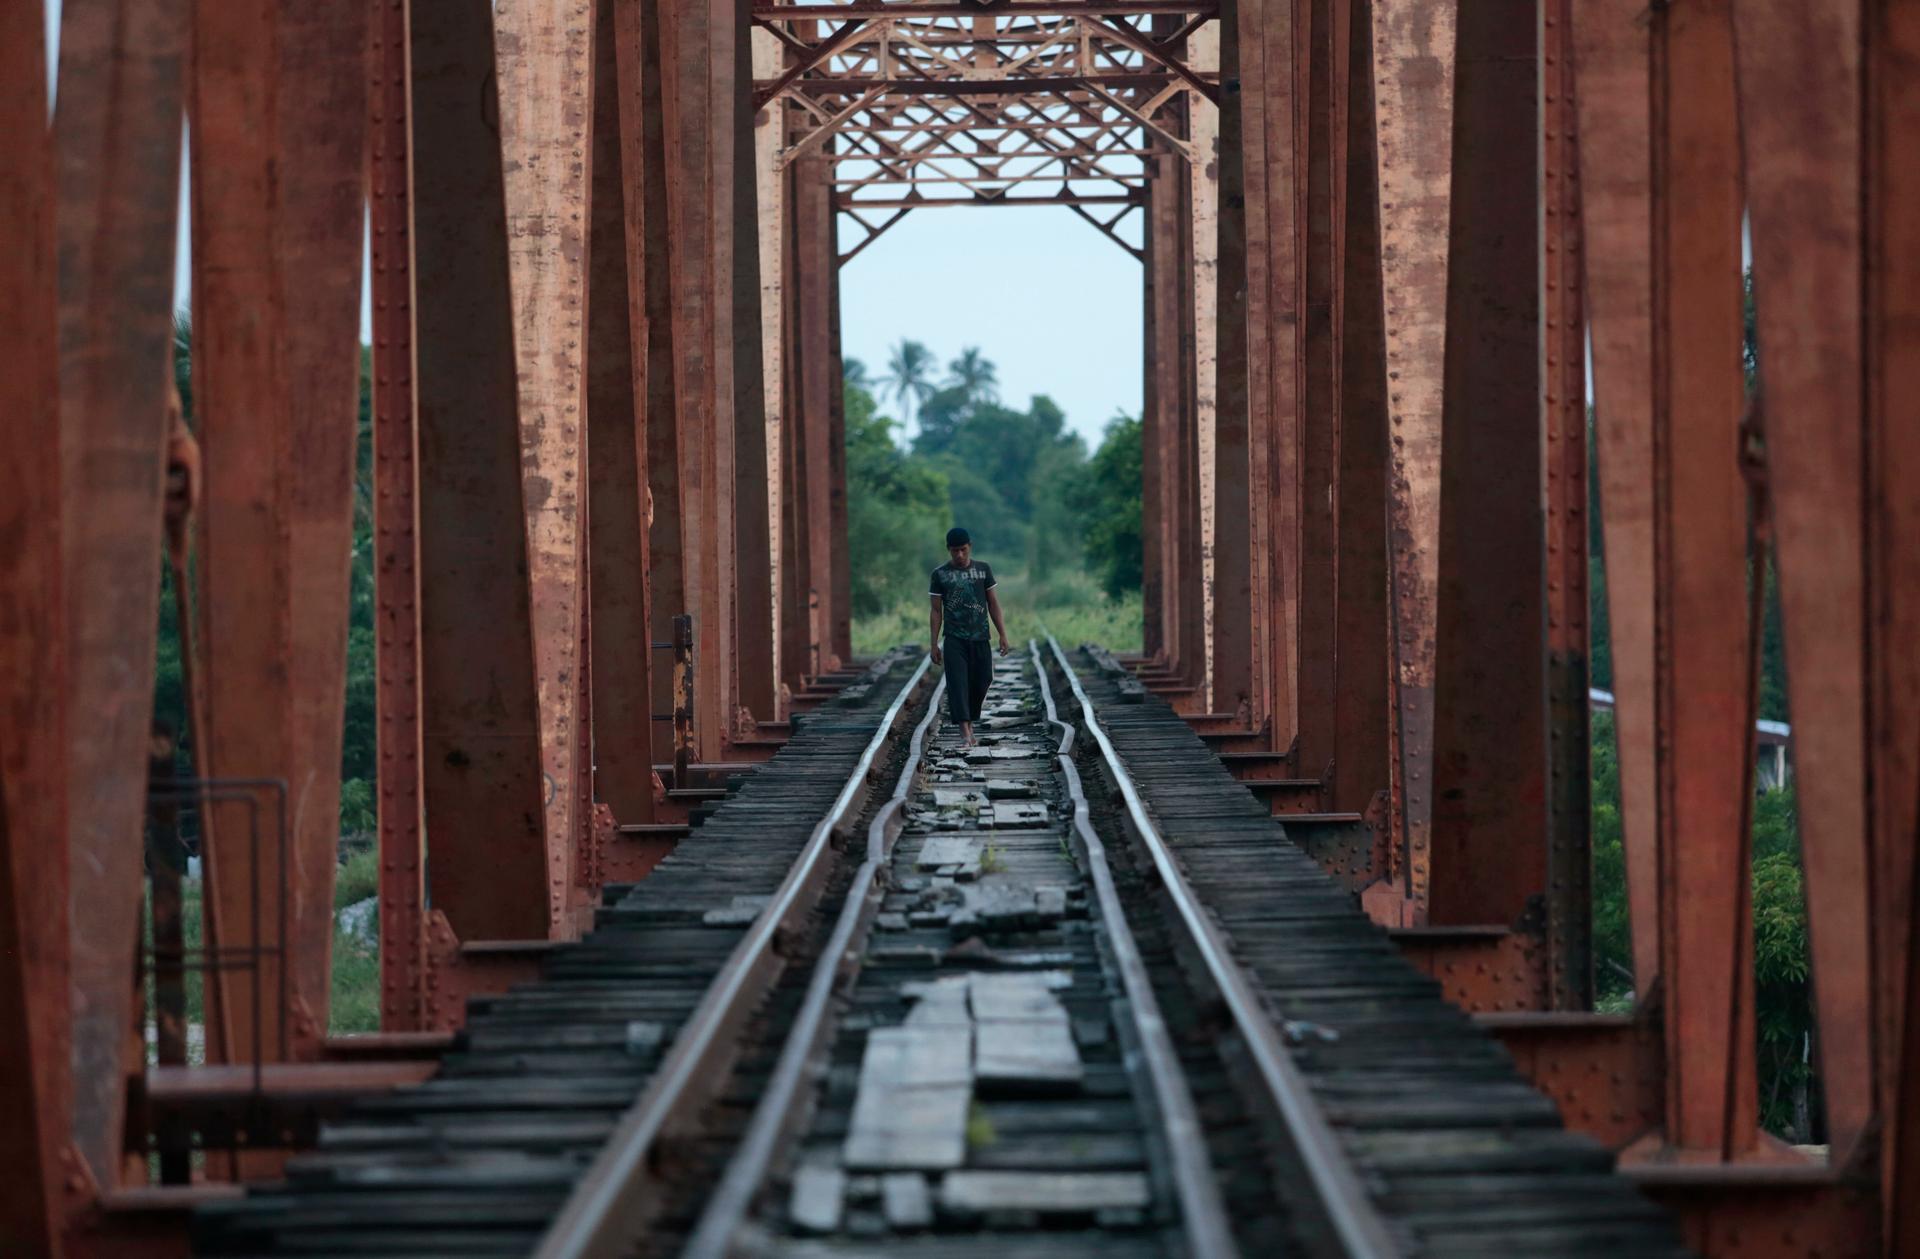 A Central American migrant walks on the train tracks in Mexico en route to the US border.